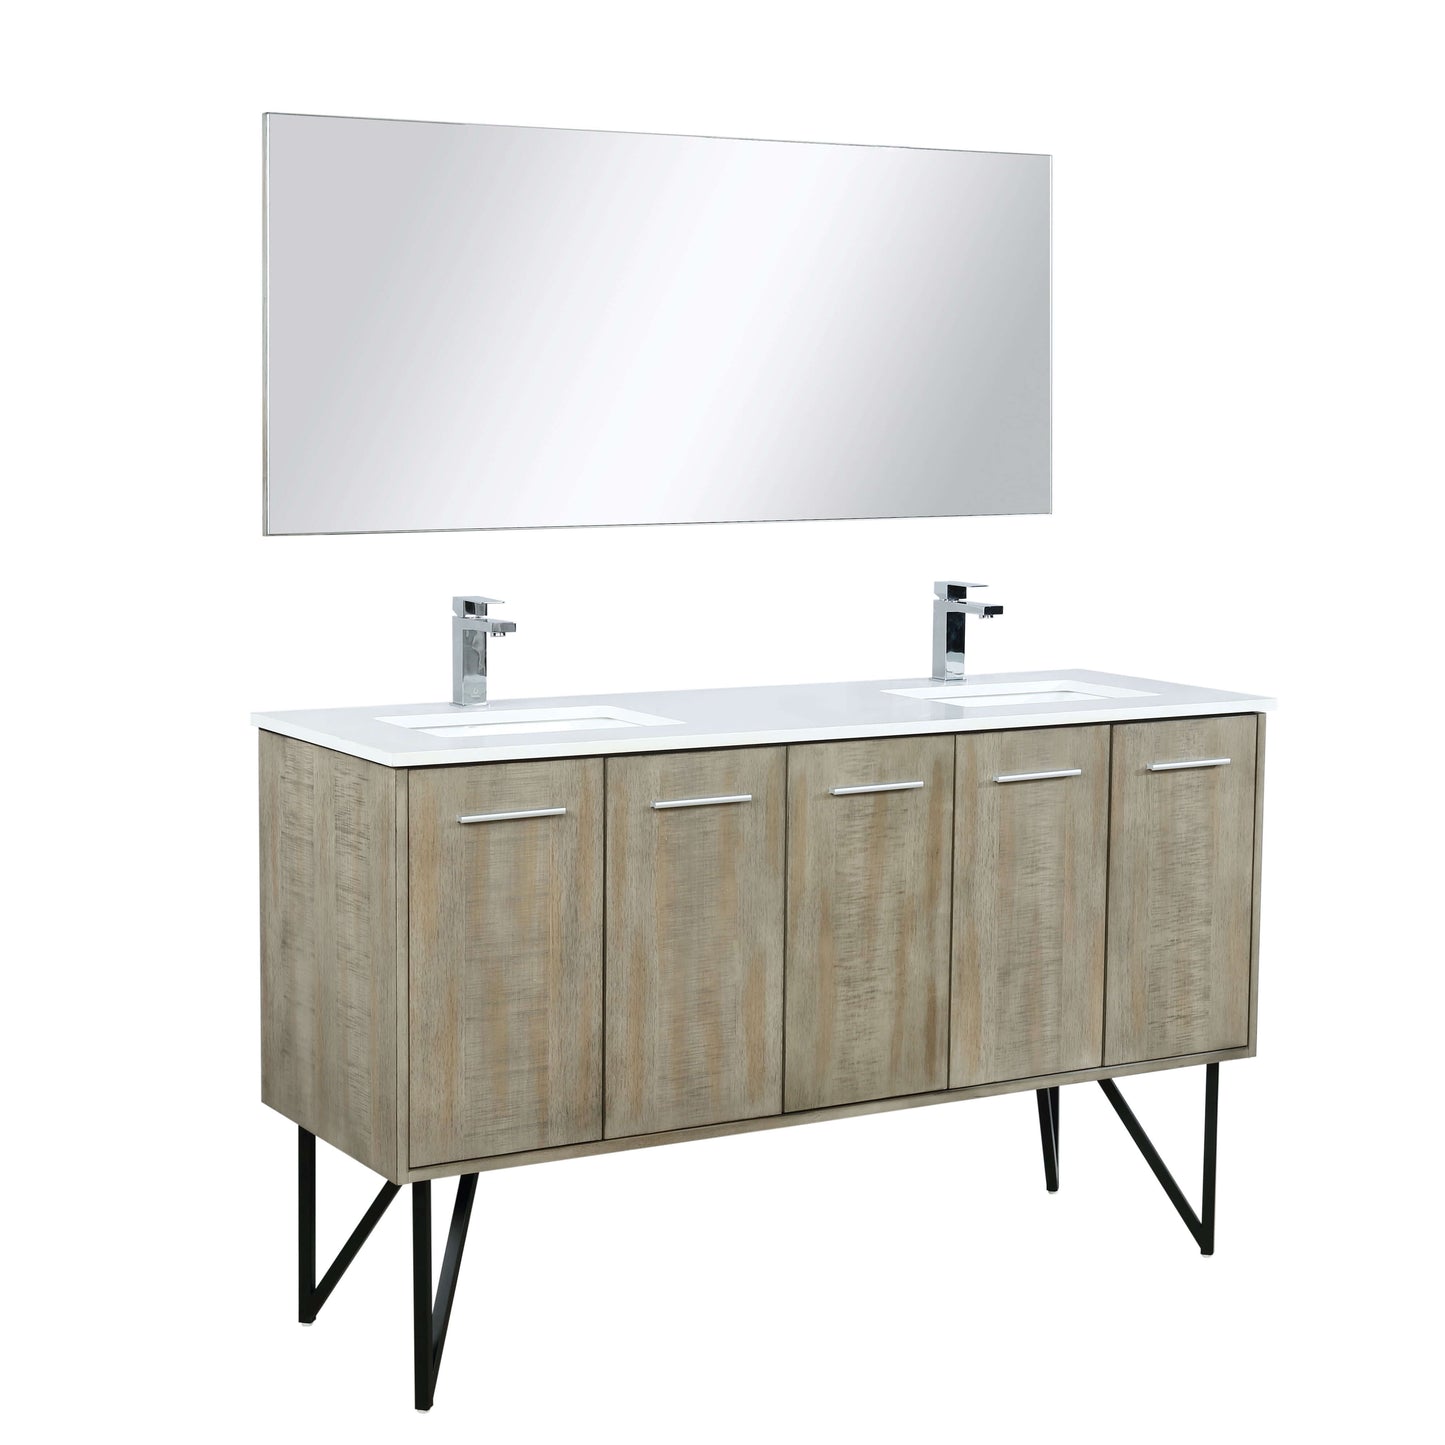 Lancy 60" Rustic Acacia Double Bathroom Vanity, White Quartz Top, White Square Sinks, Labaro Brushed Nickel Faucet Set, and 55" Frameless Mirror - LLC60DKSOSM55FCH